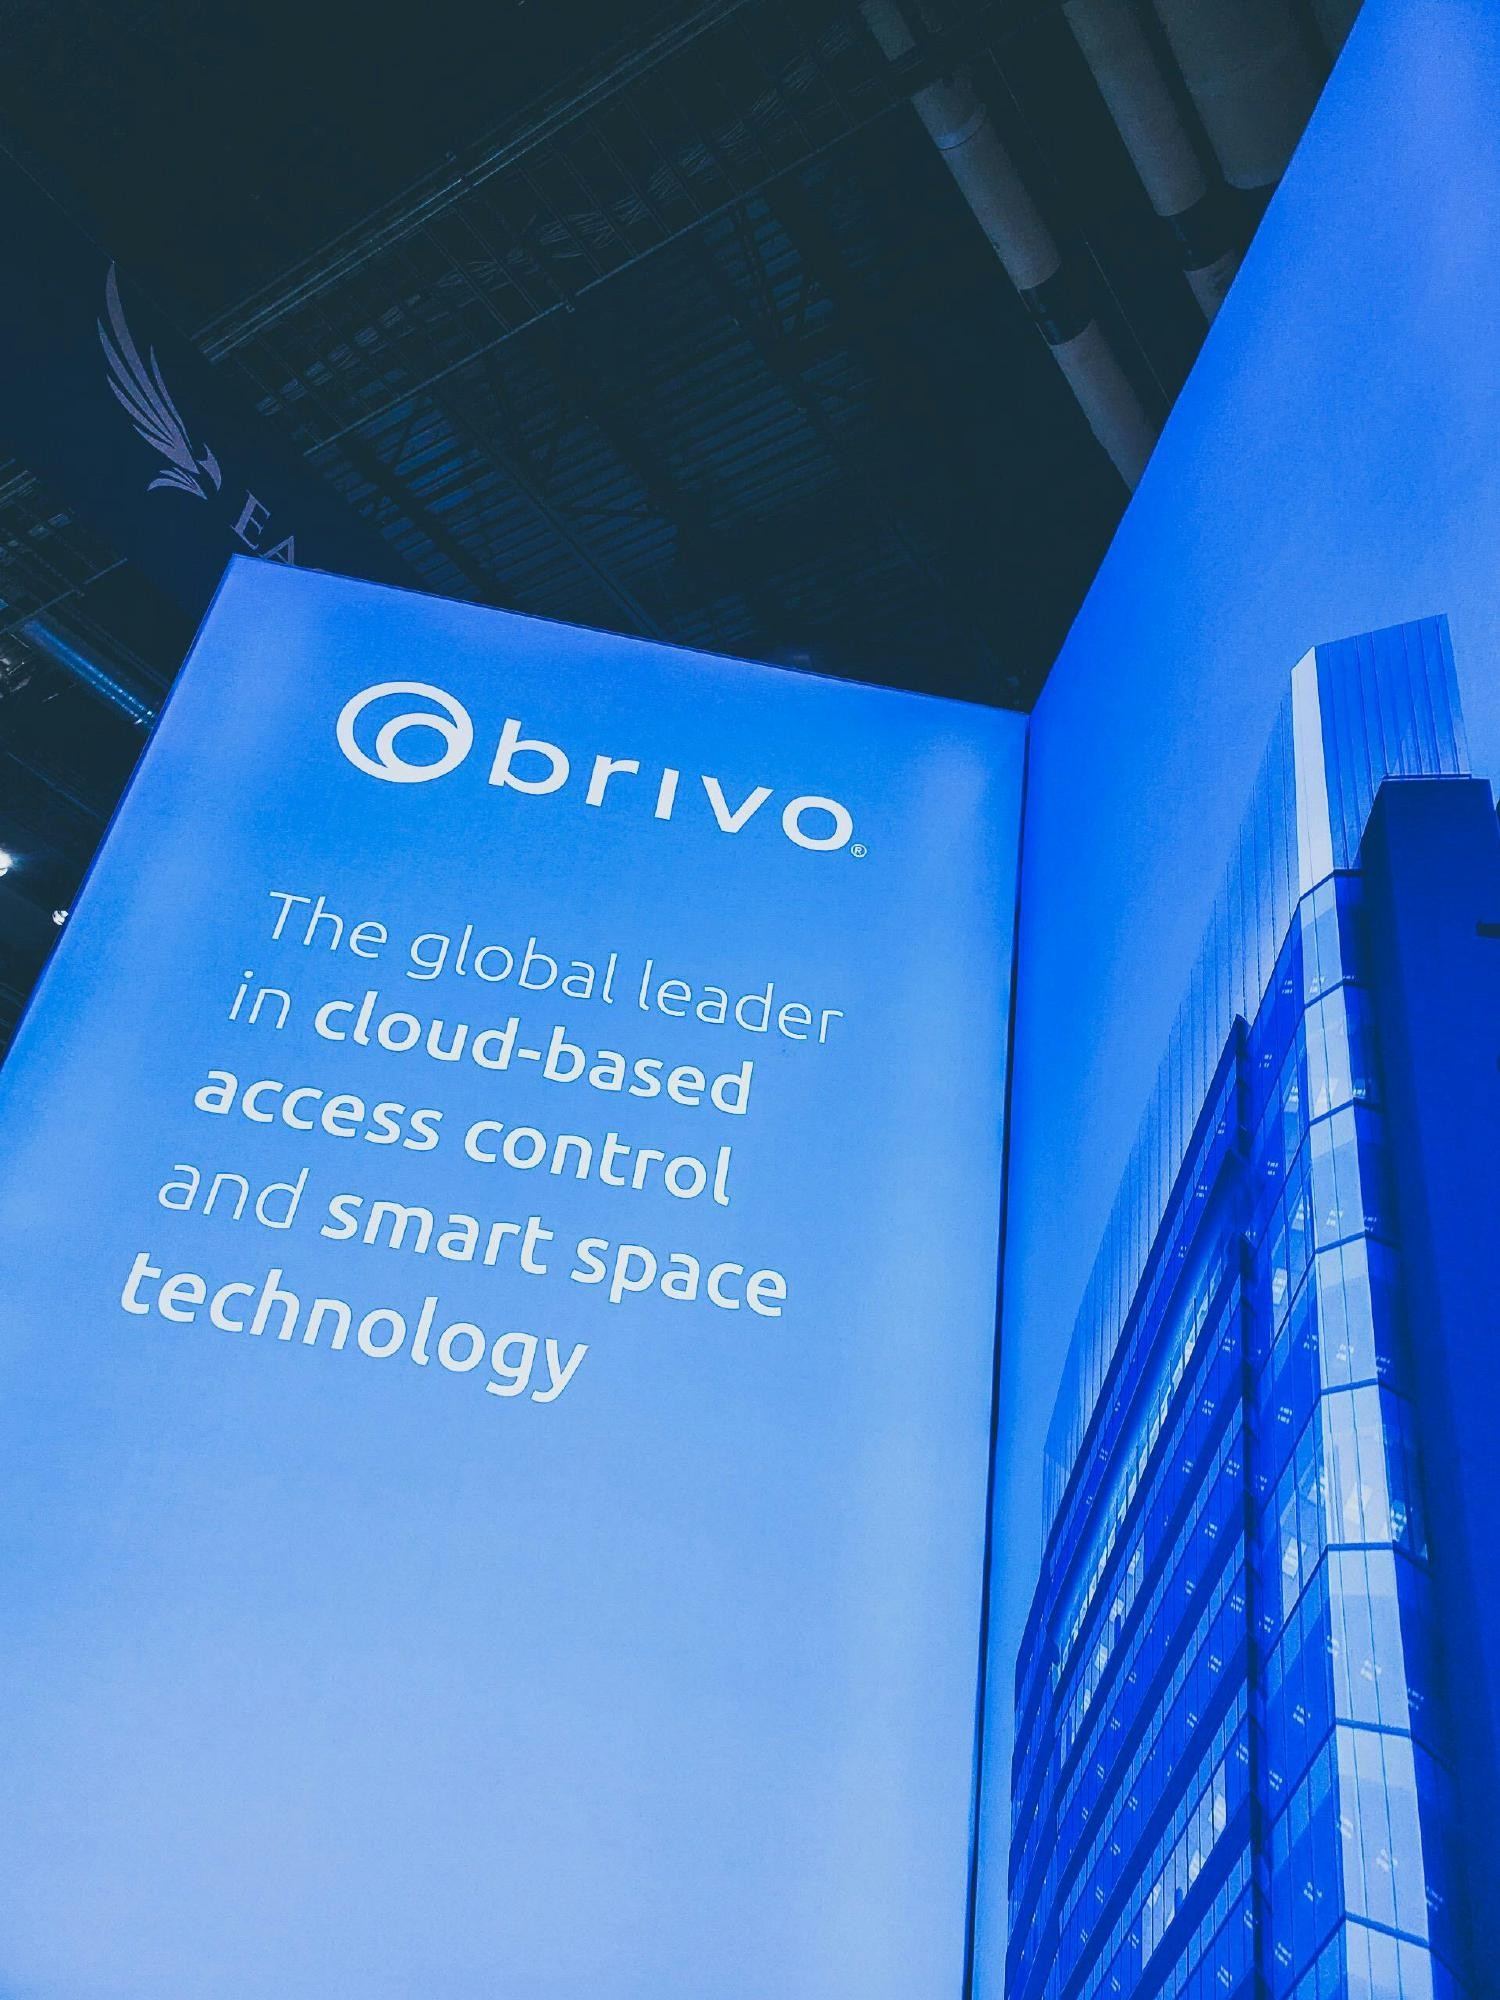 Want to learn more about Brivo? Come check us out at tradeshows and events